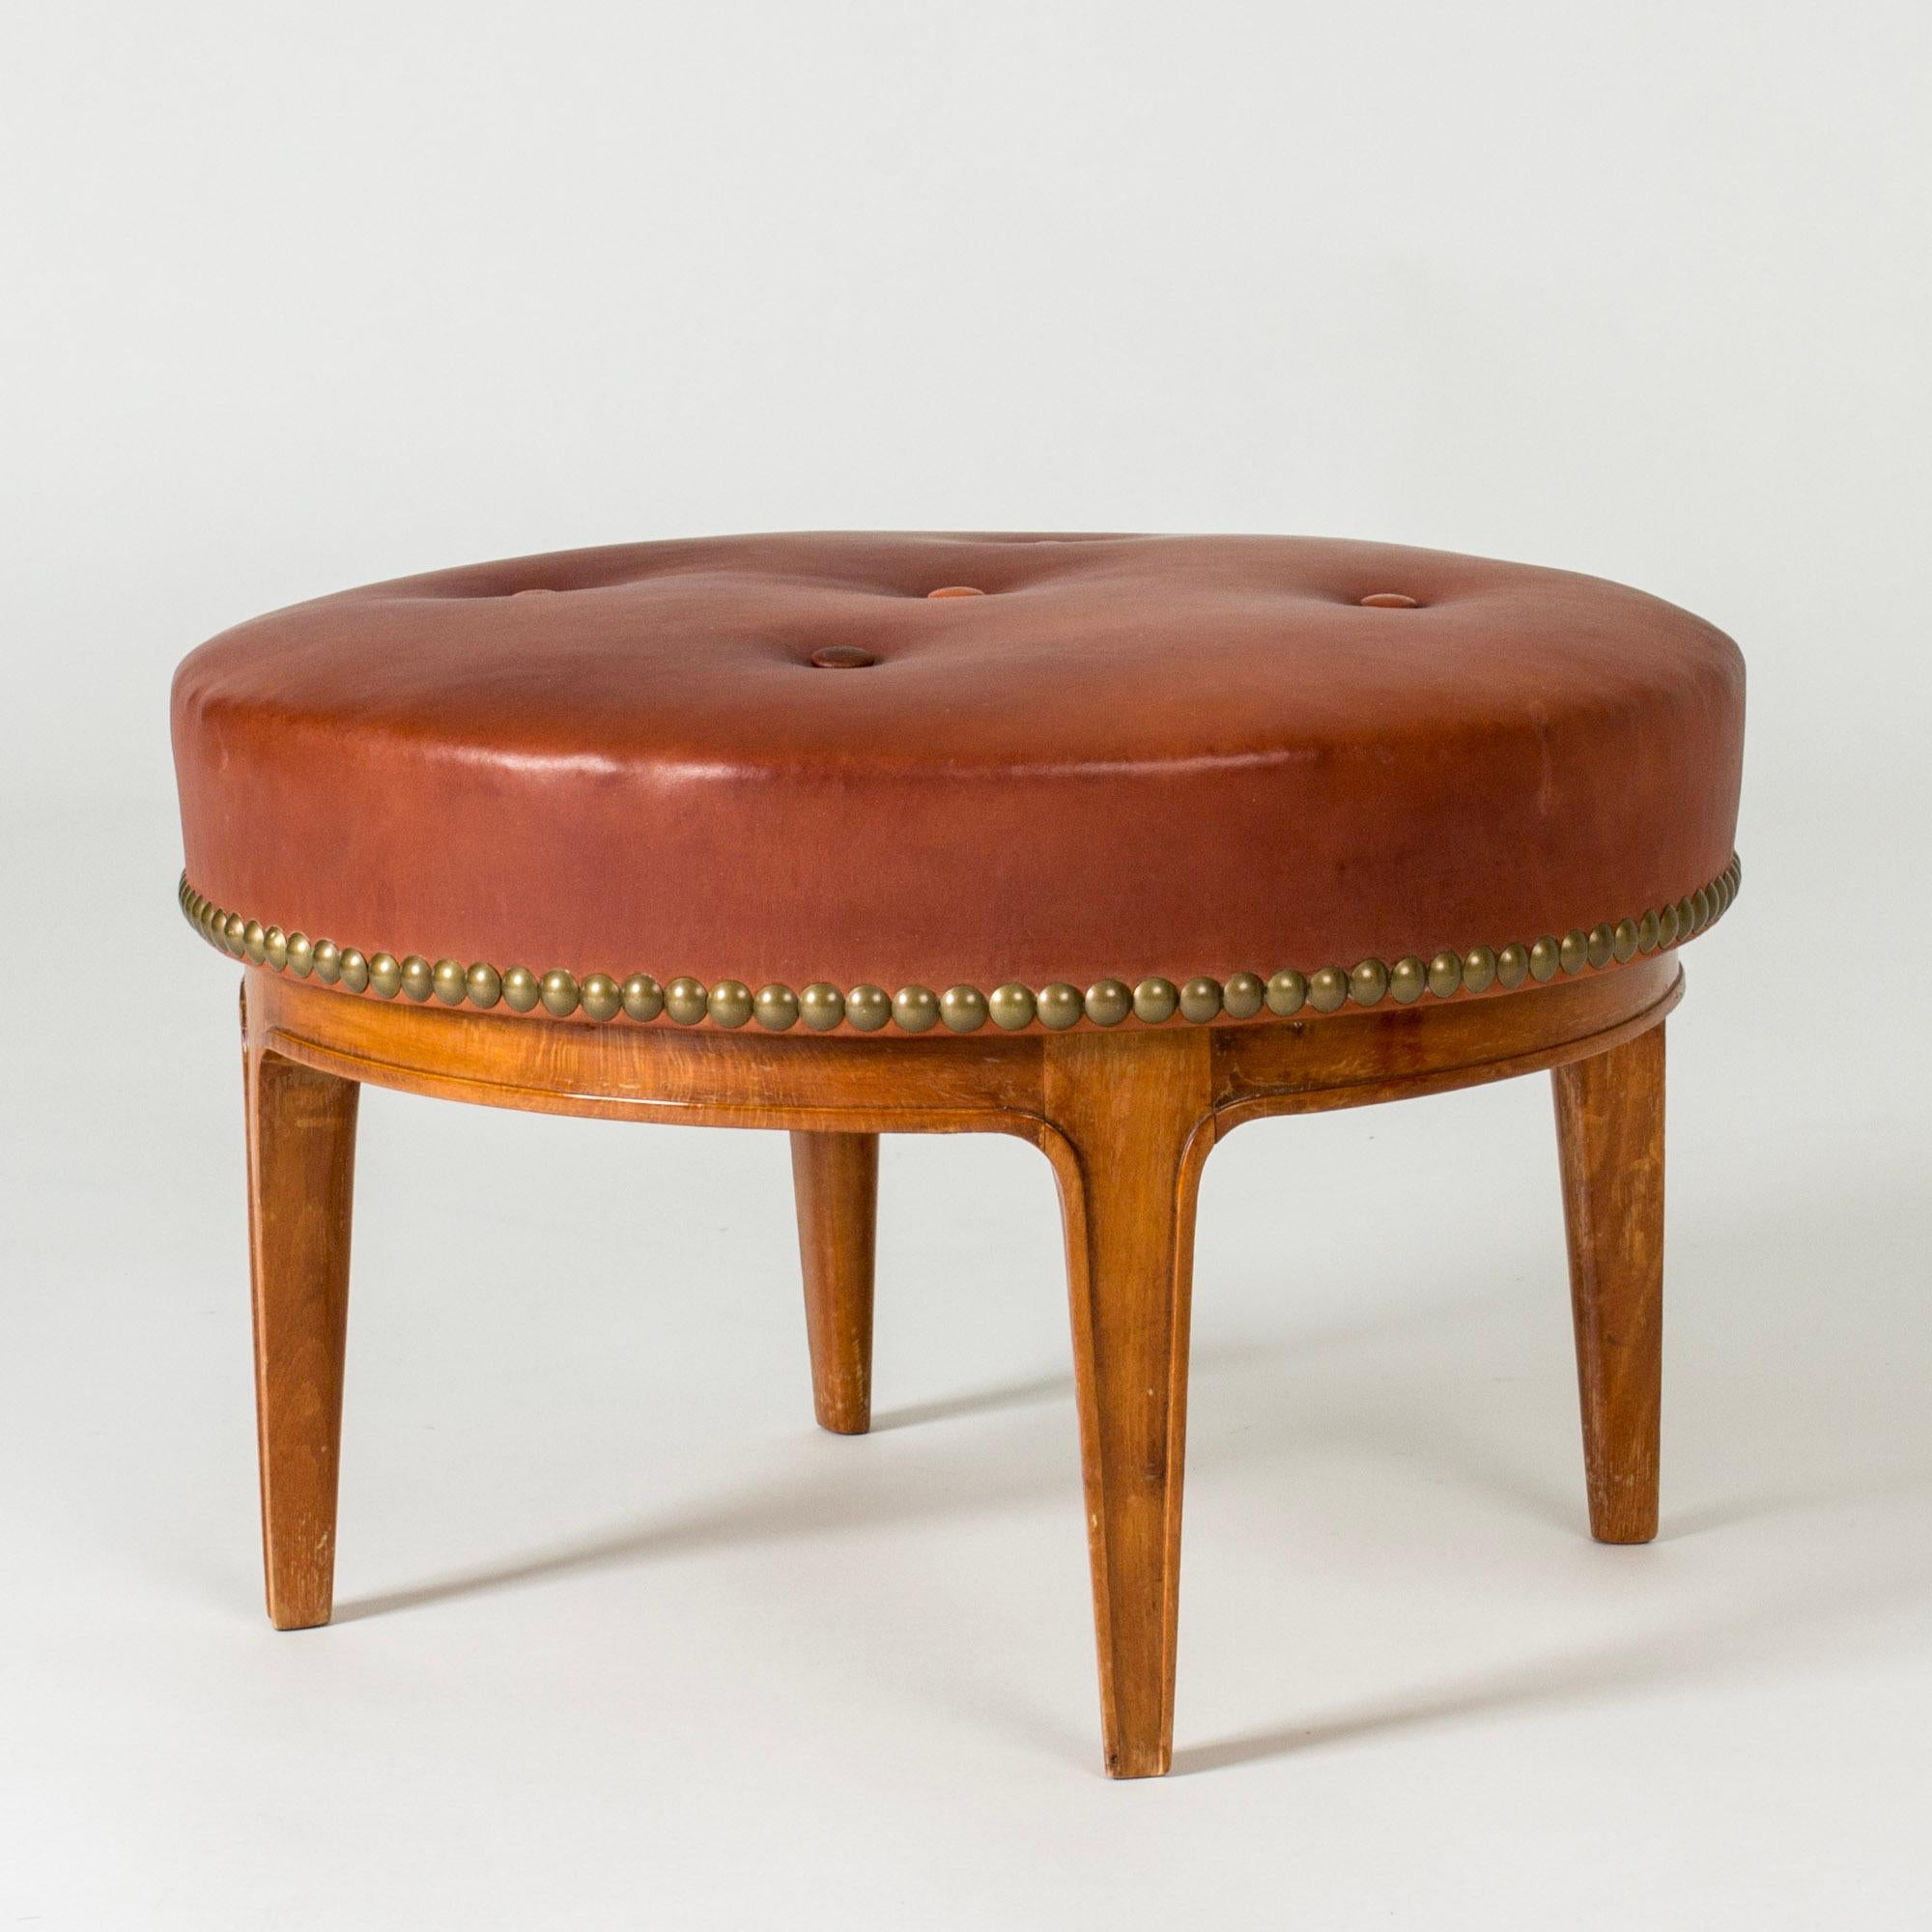 Lovely midcentury ottoman by Axel Larsson, with a mahogany base and dressed with elegant brown leather. Row of decorative brass nails around the edge.